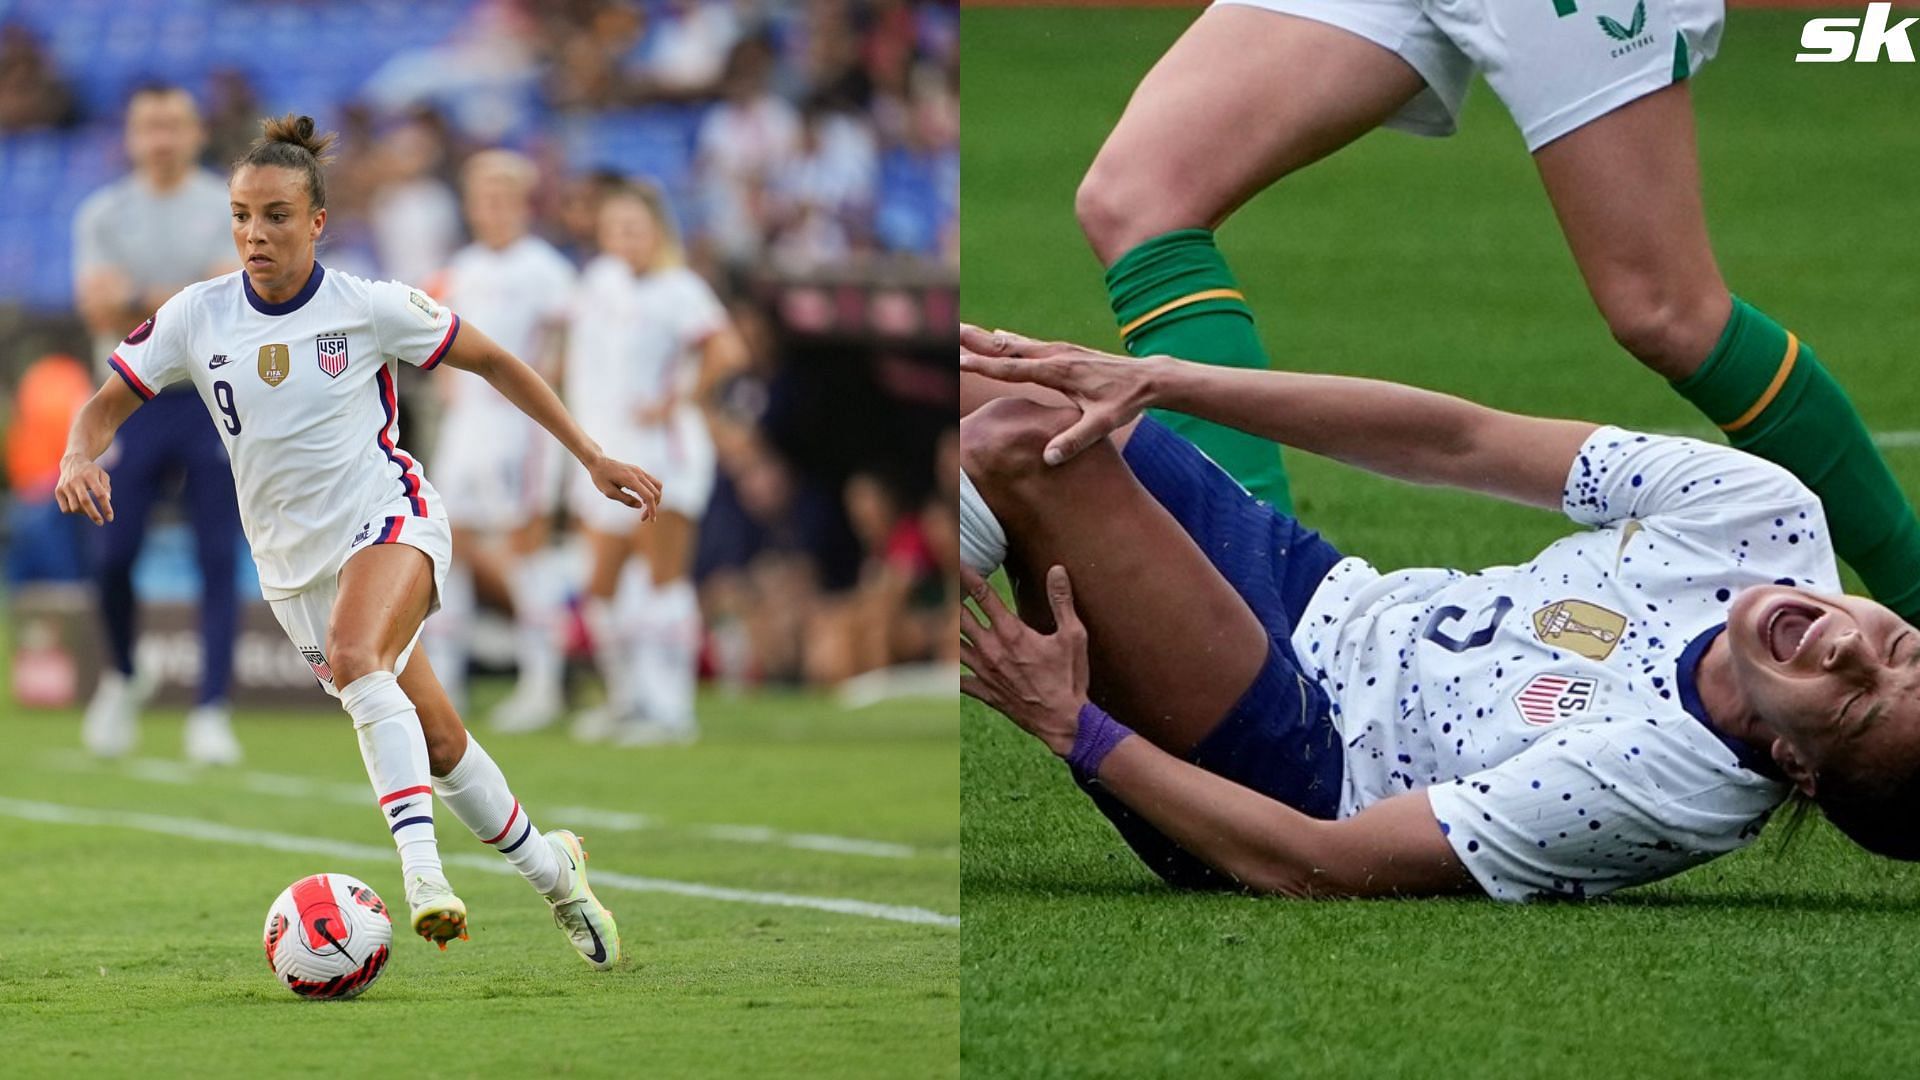 USWNT's Mallory Pugh, Braves' Dansby Swanson Share Major News - The Spun:  What's Trending In The Sports World Today